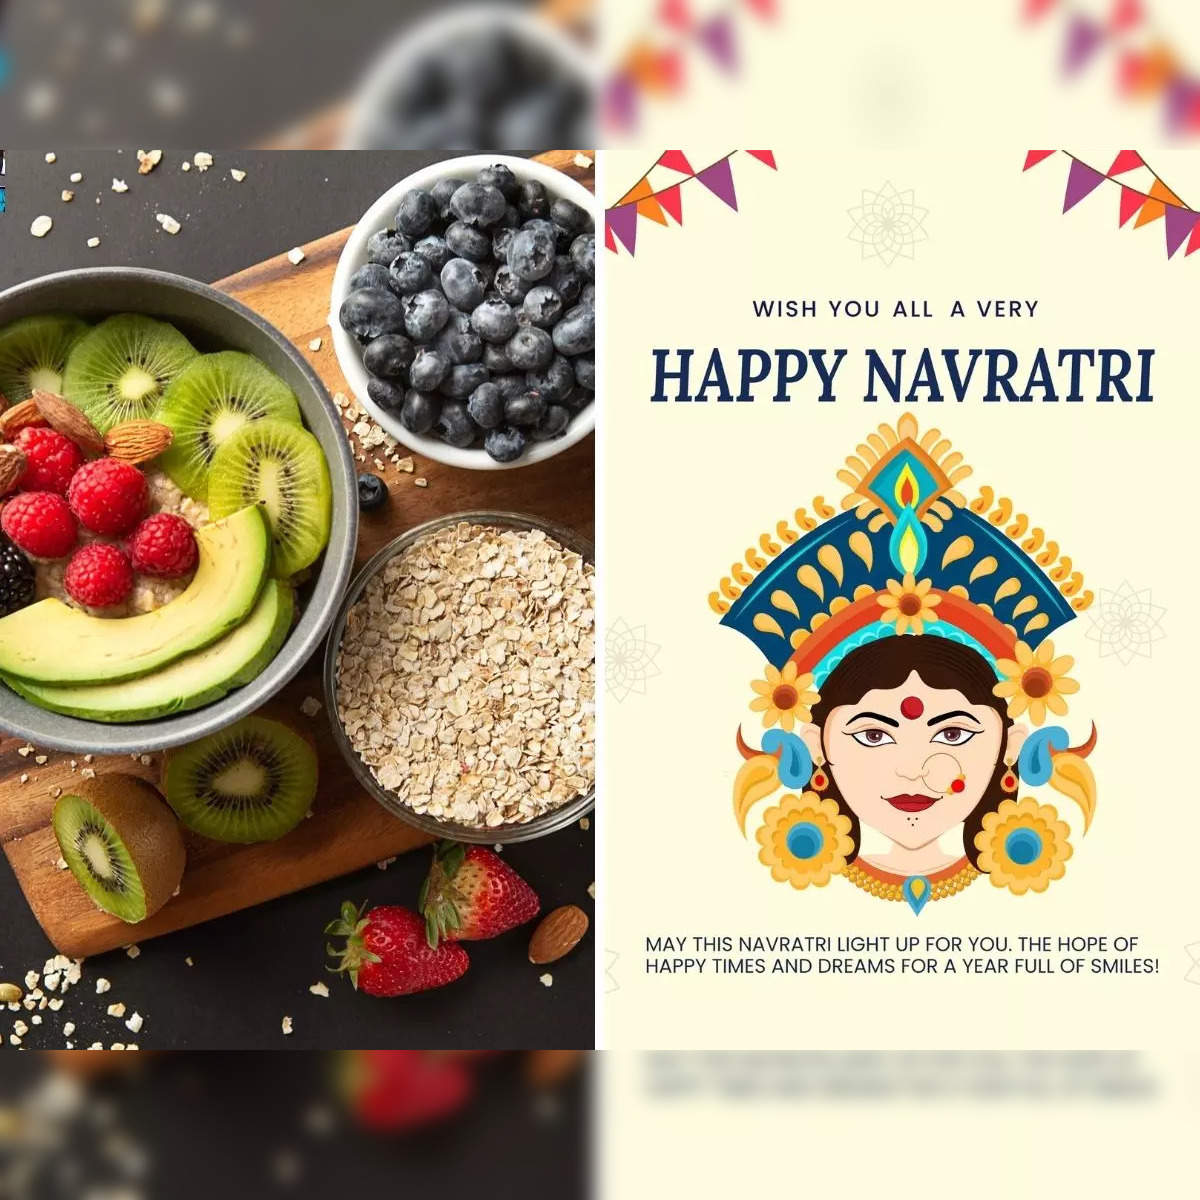 fasting for navratri a list of things to do and not do for 9 days